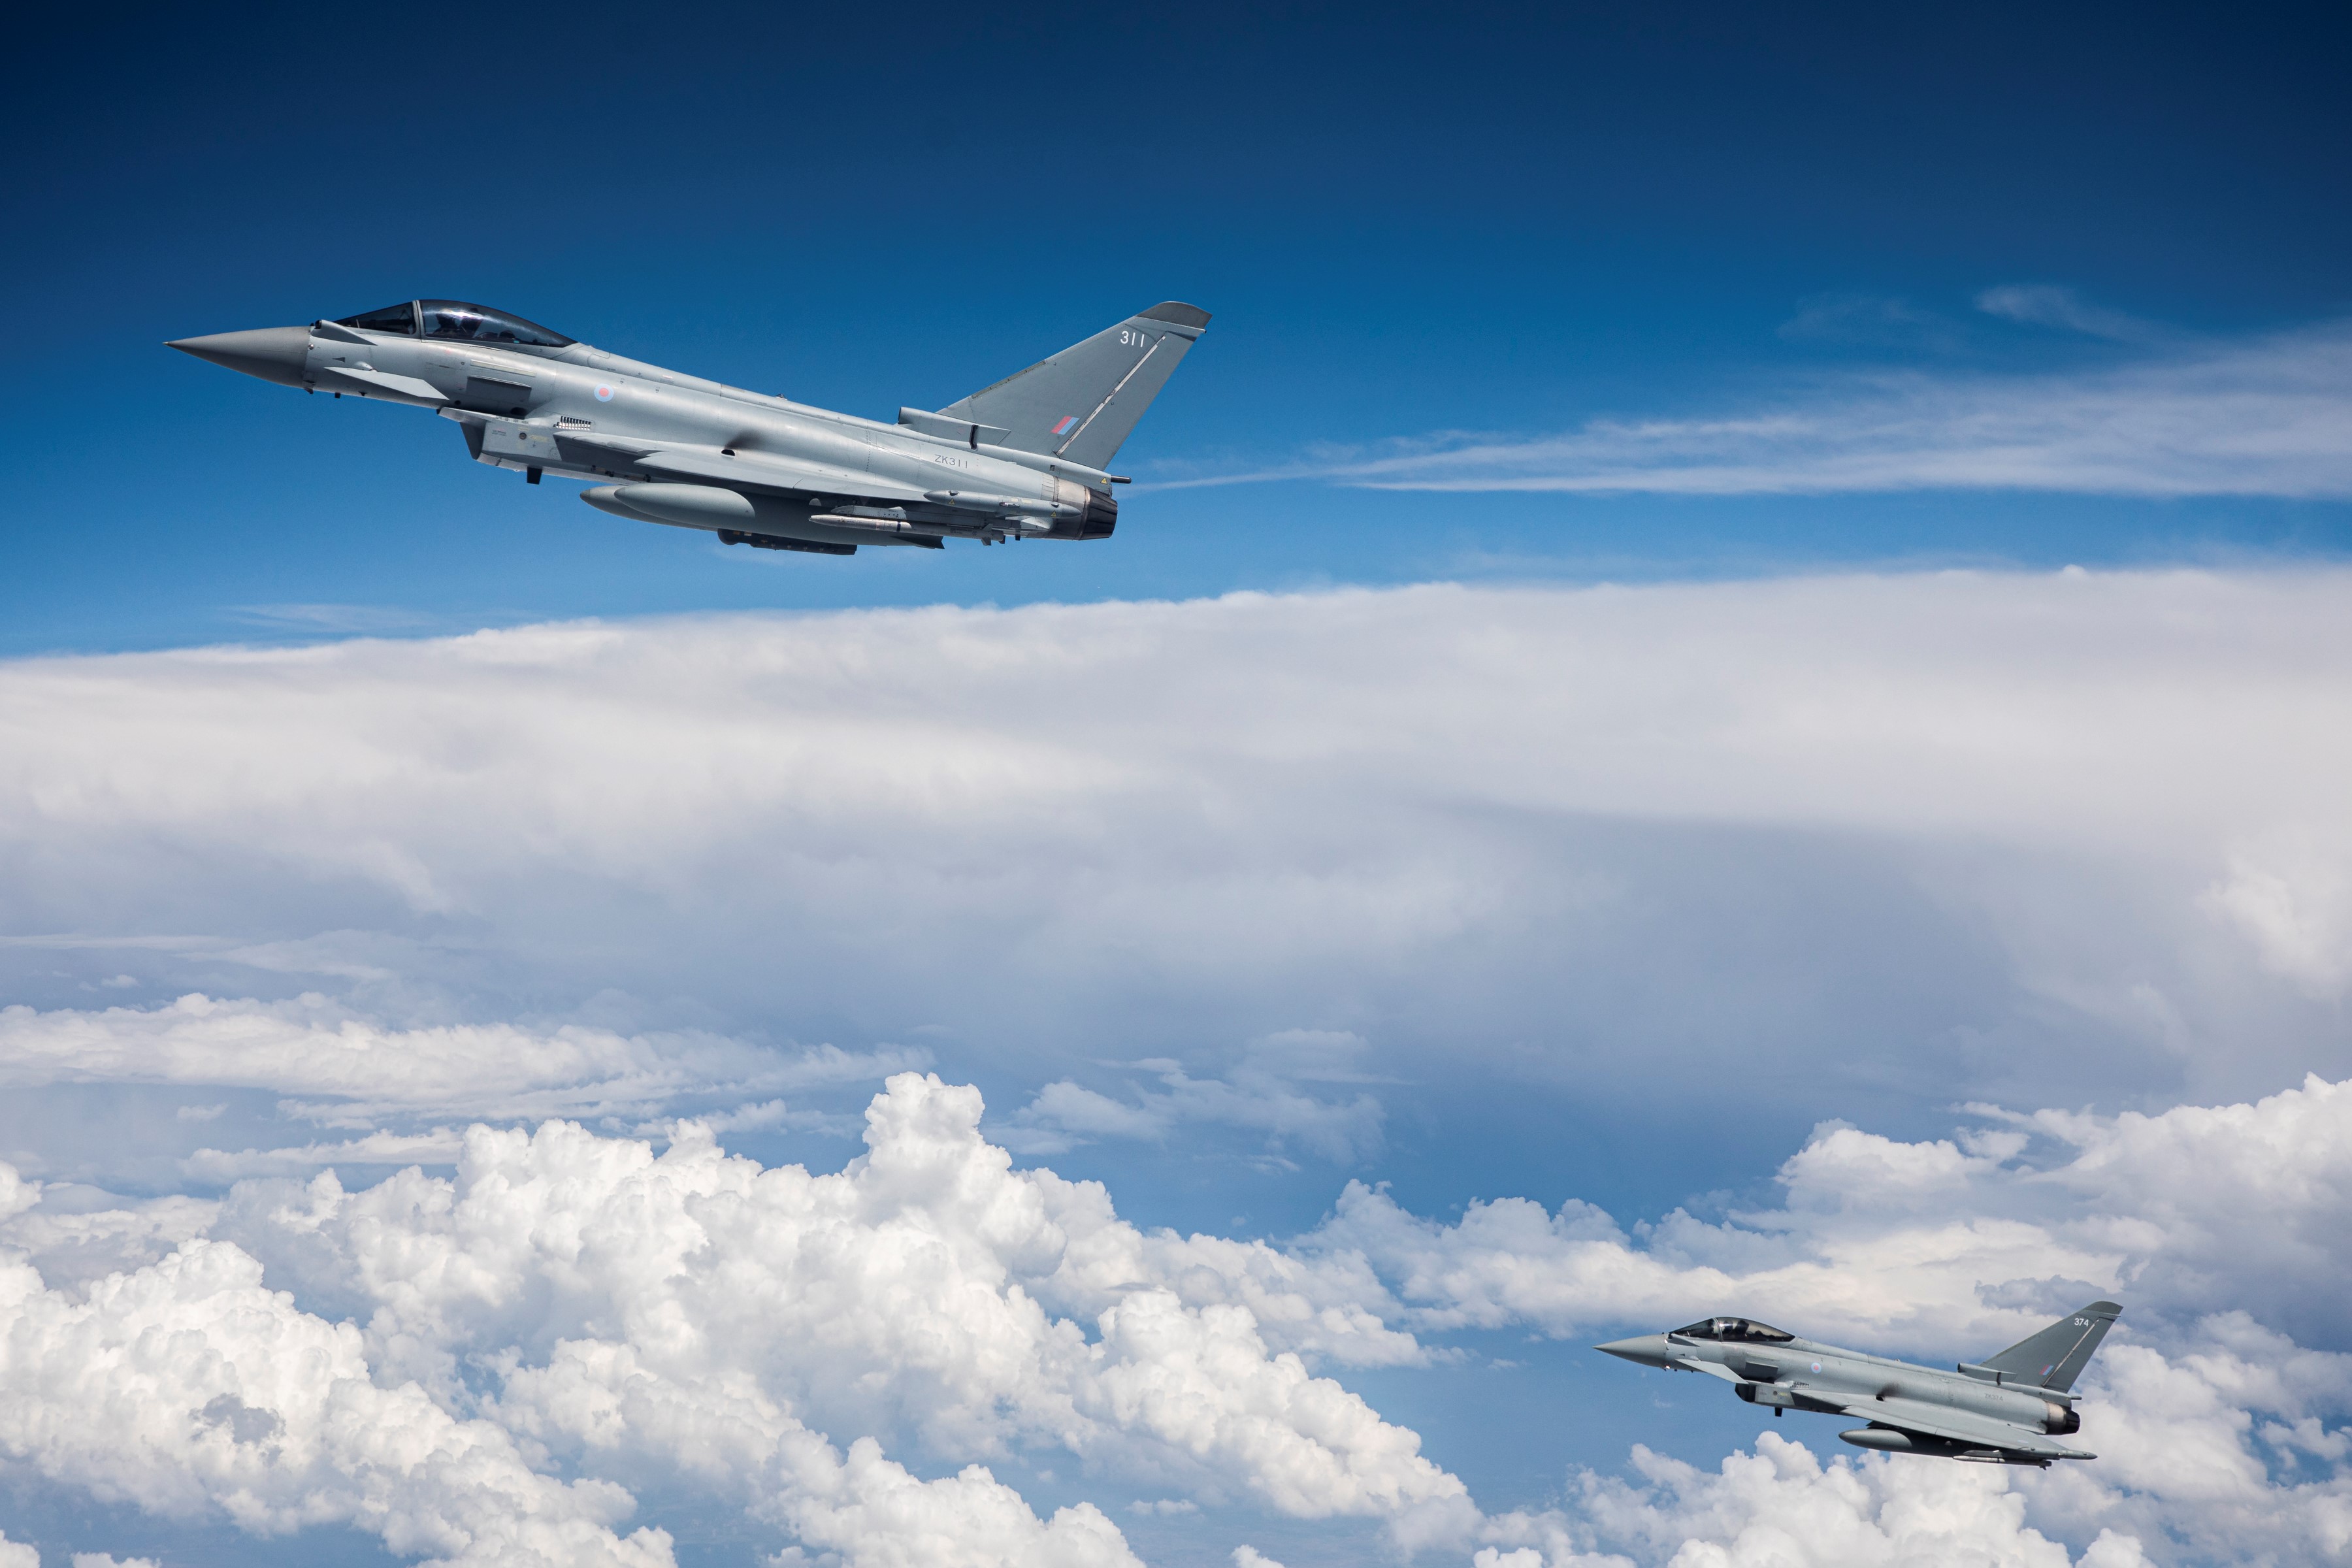 Image shows two RAF Typhoons in flight above the clouds.